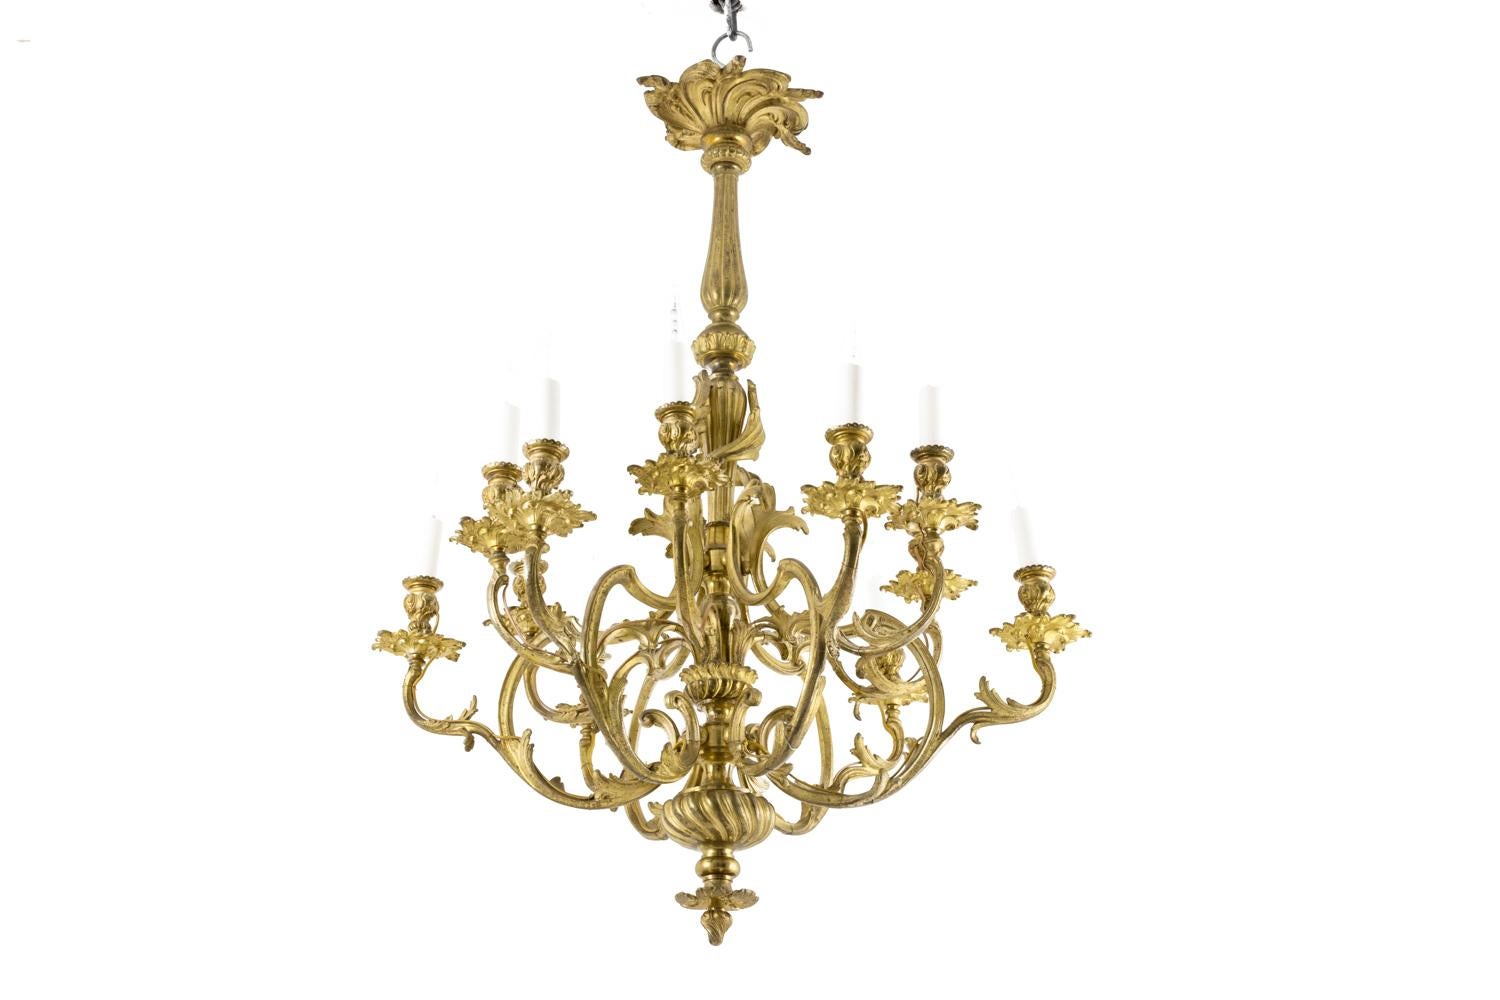 Rocaille style chandelier in gilt bronze with 12 fires. Cache-bélière (*hide hook) in rocaille rosette shape. Central shaft composed by two fluted balusters linked each other by a flat decorated with palm leaves.
Scalloped arm lights with an